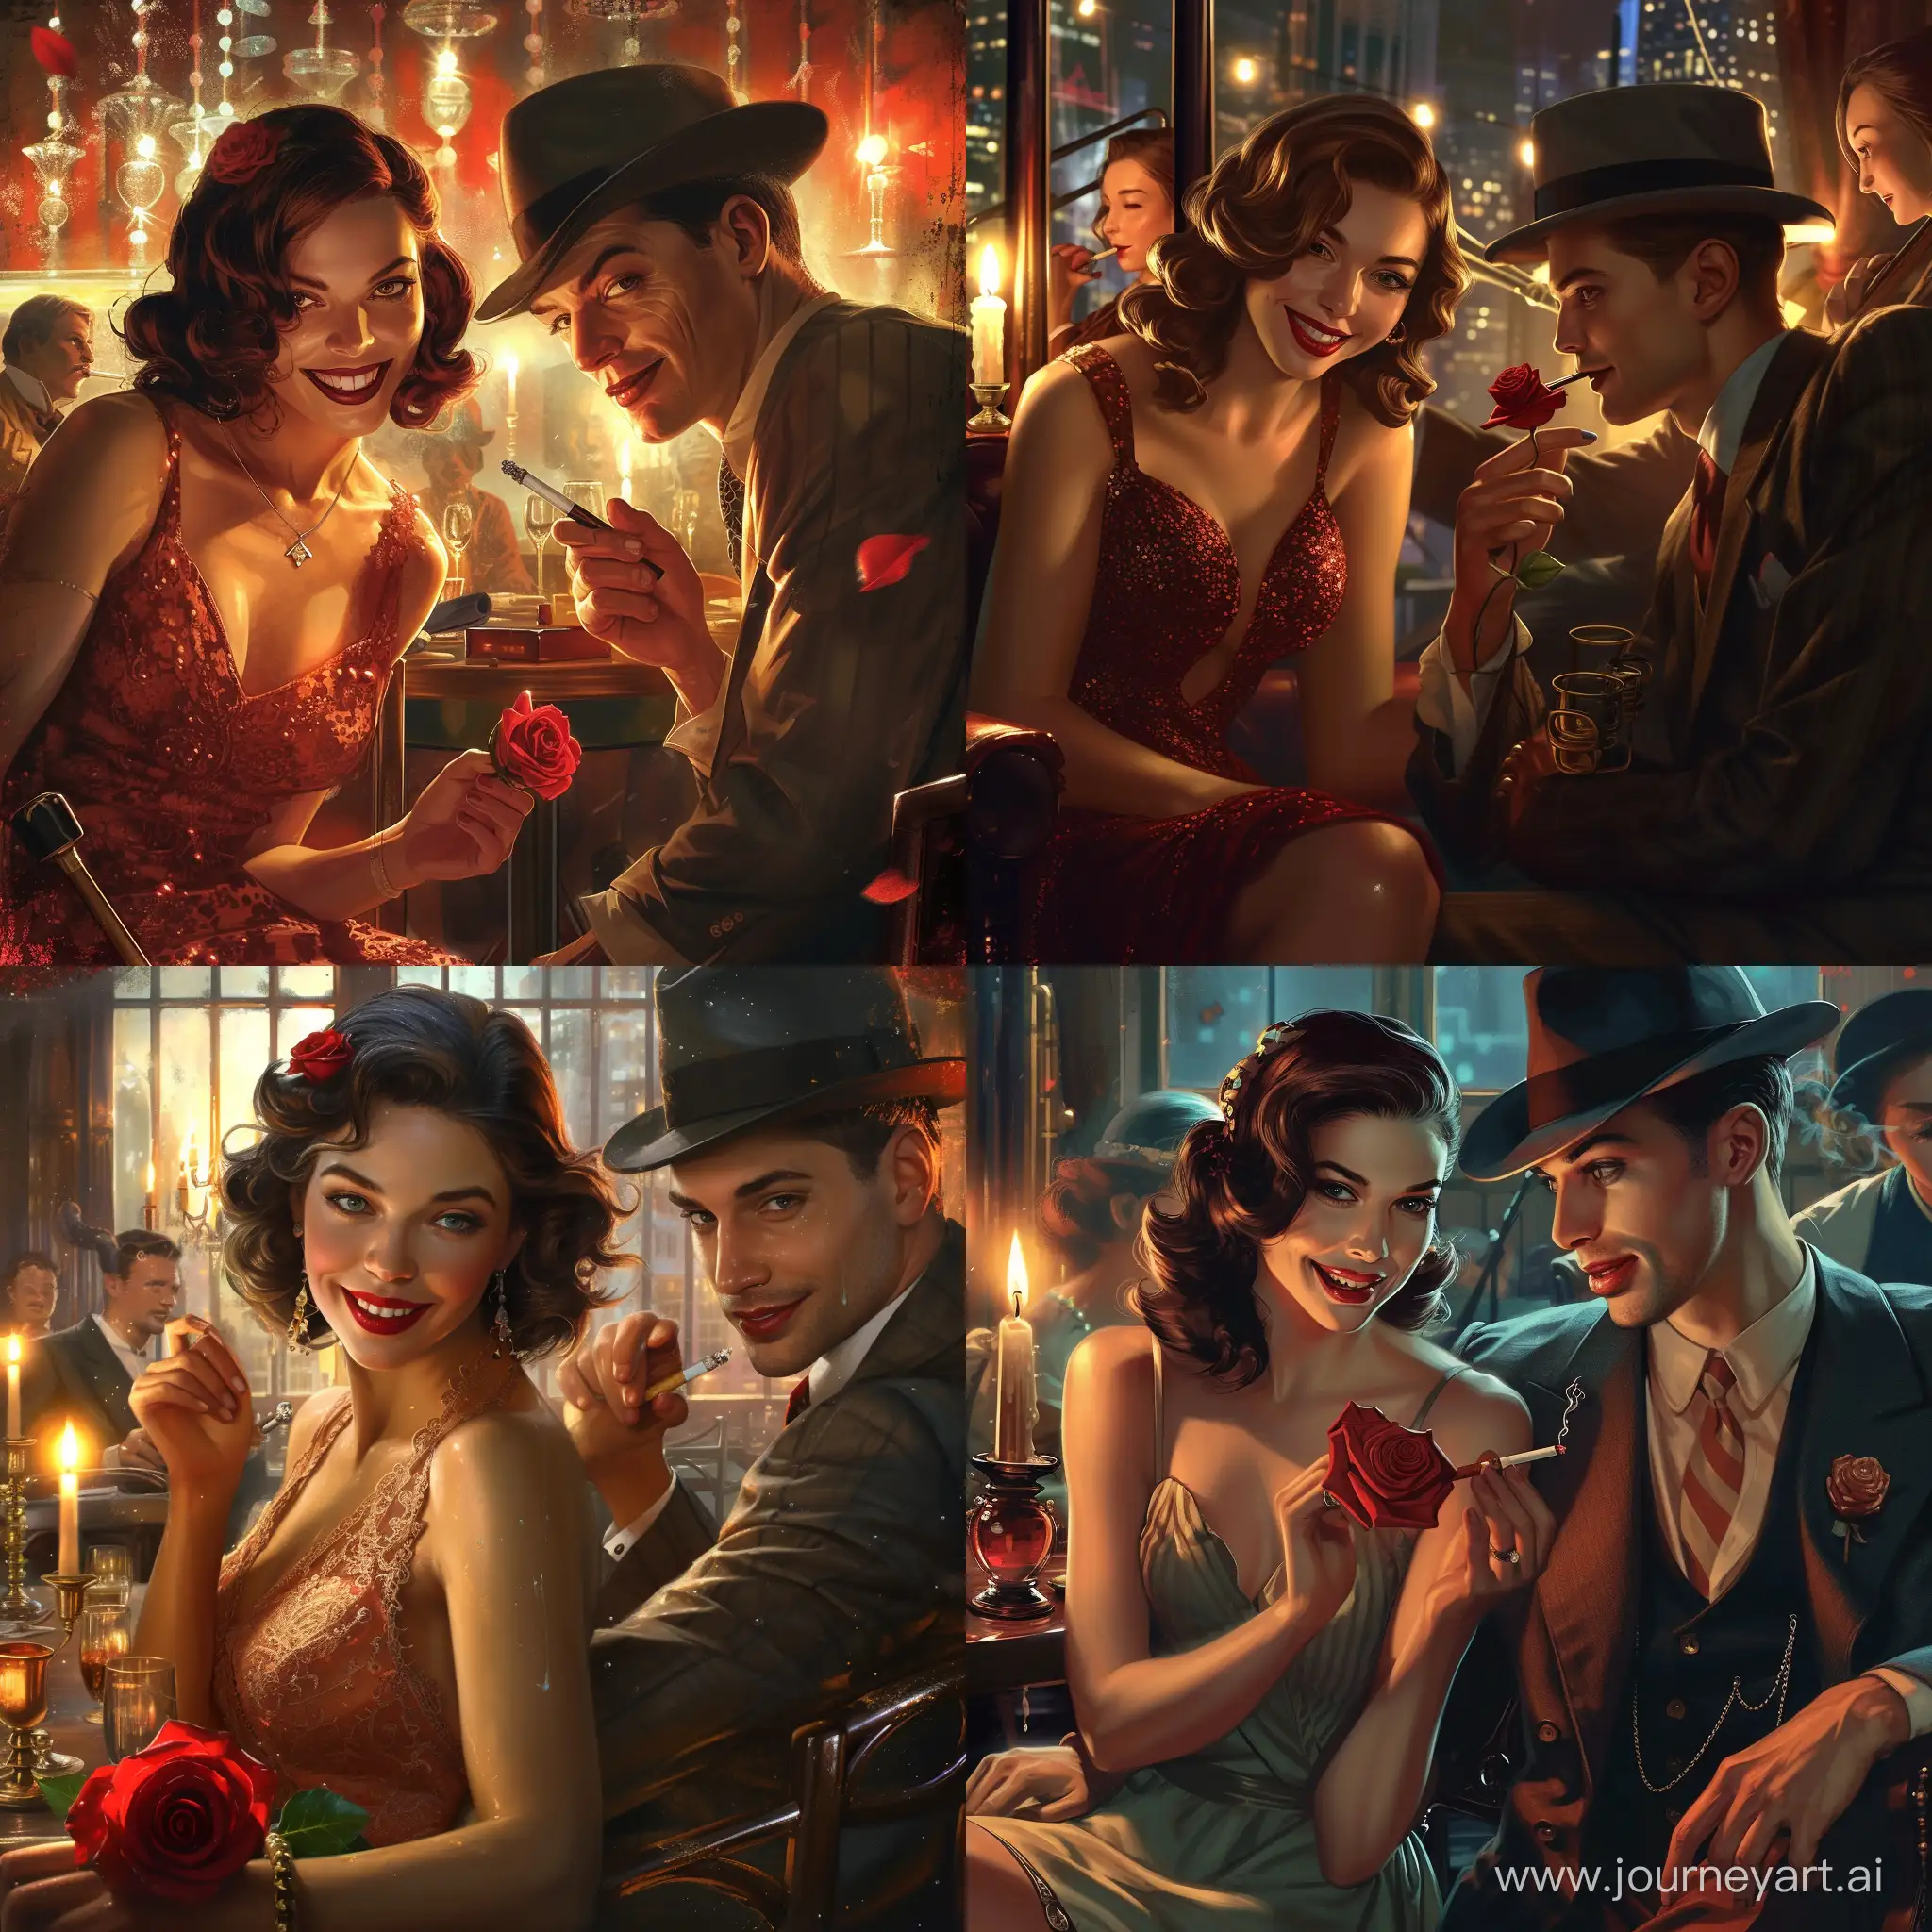 Against the background of a 1920s jazz band, in the dazzling light of a New York restaurant, two beautiful women are sitting: a woman in a dress of that era, with a smile on her lips, holding a red rose, her gaze full of lively interest Next to her is a fiery man in a classic suit and hat, looking at her with a mysterious the expression on his face, holding a cigarette holder, reflects the candlelight and the sounds of jazz music in his eyes. Their common image is filled with romance and mystery, for example, a page from a photo that captures the moment of the great sensual rhythm of the city - version 6.0